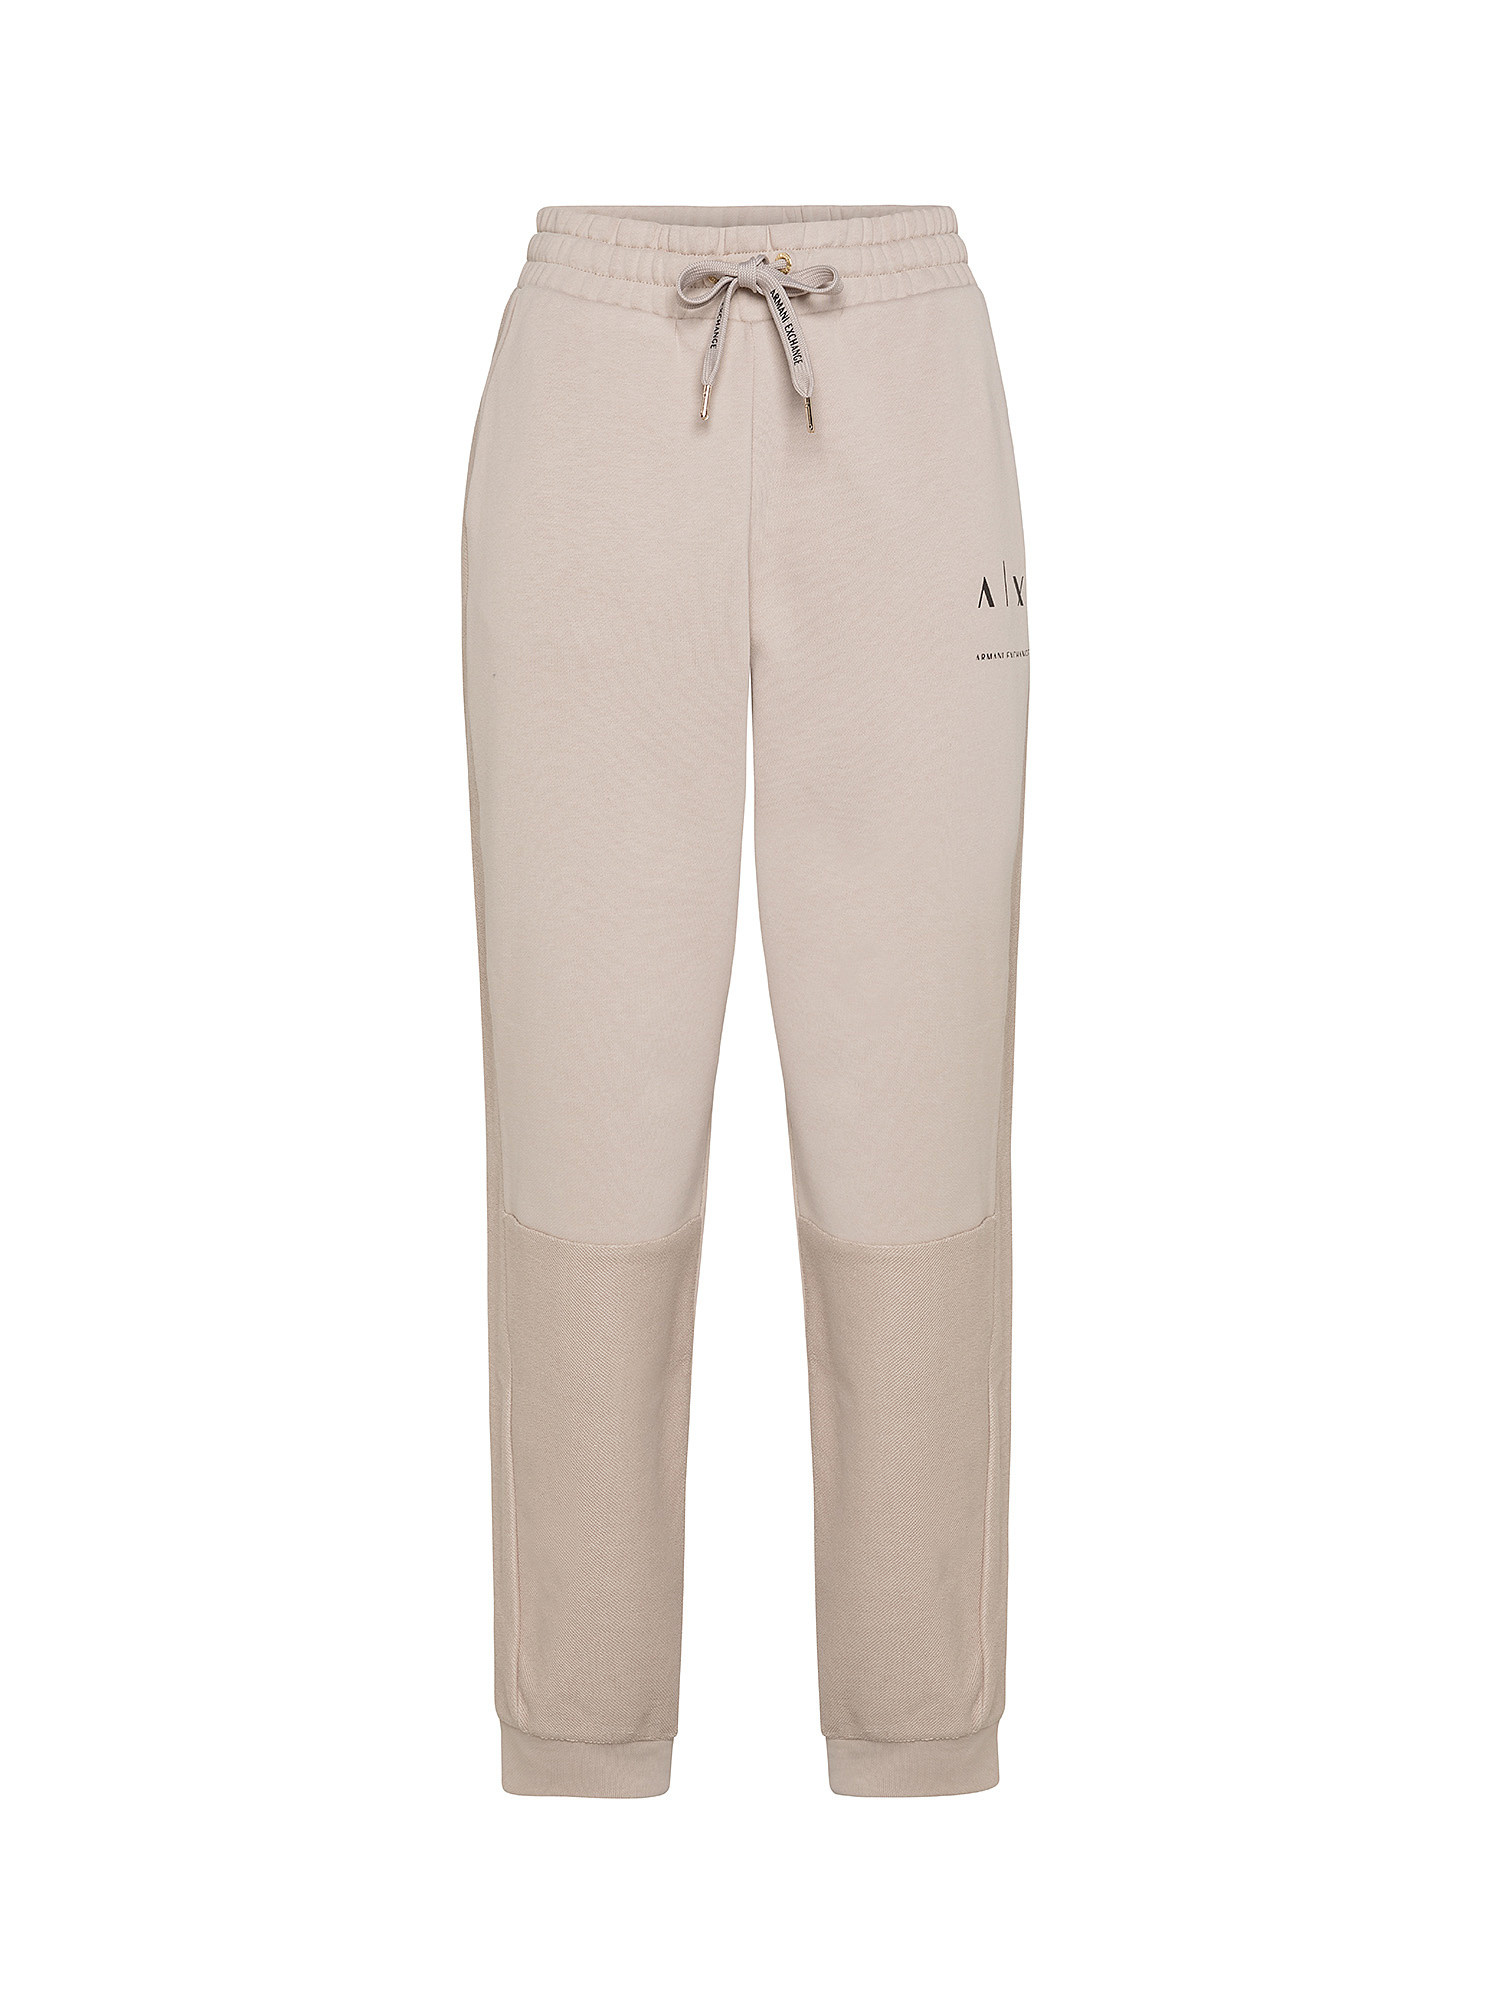 Jogger trousers with logo, Beige, large image number 0